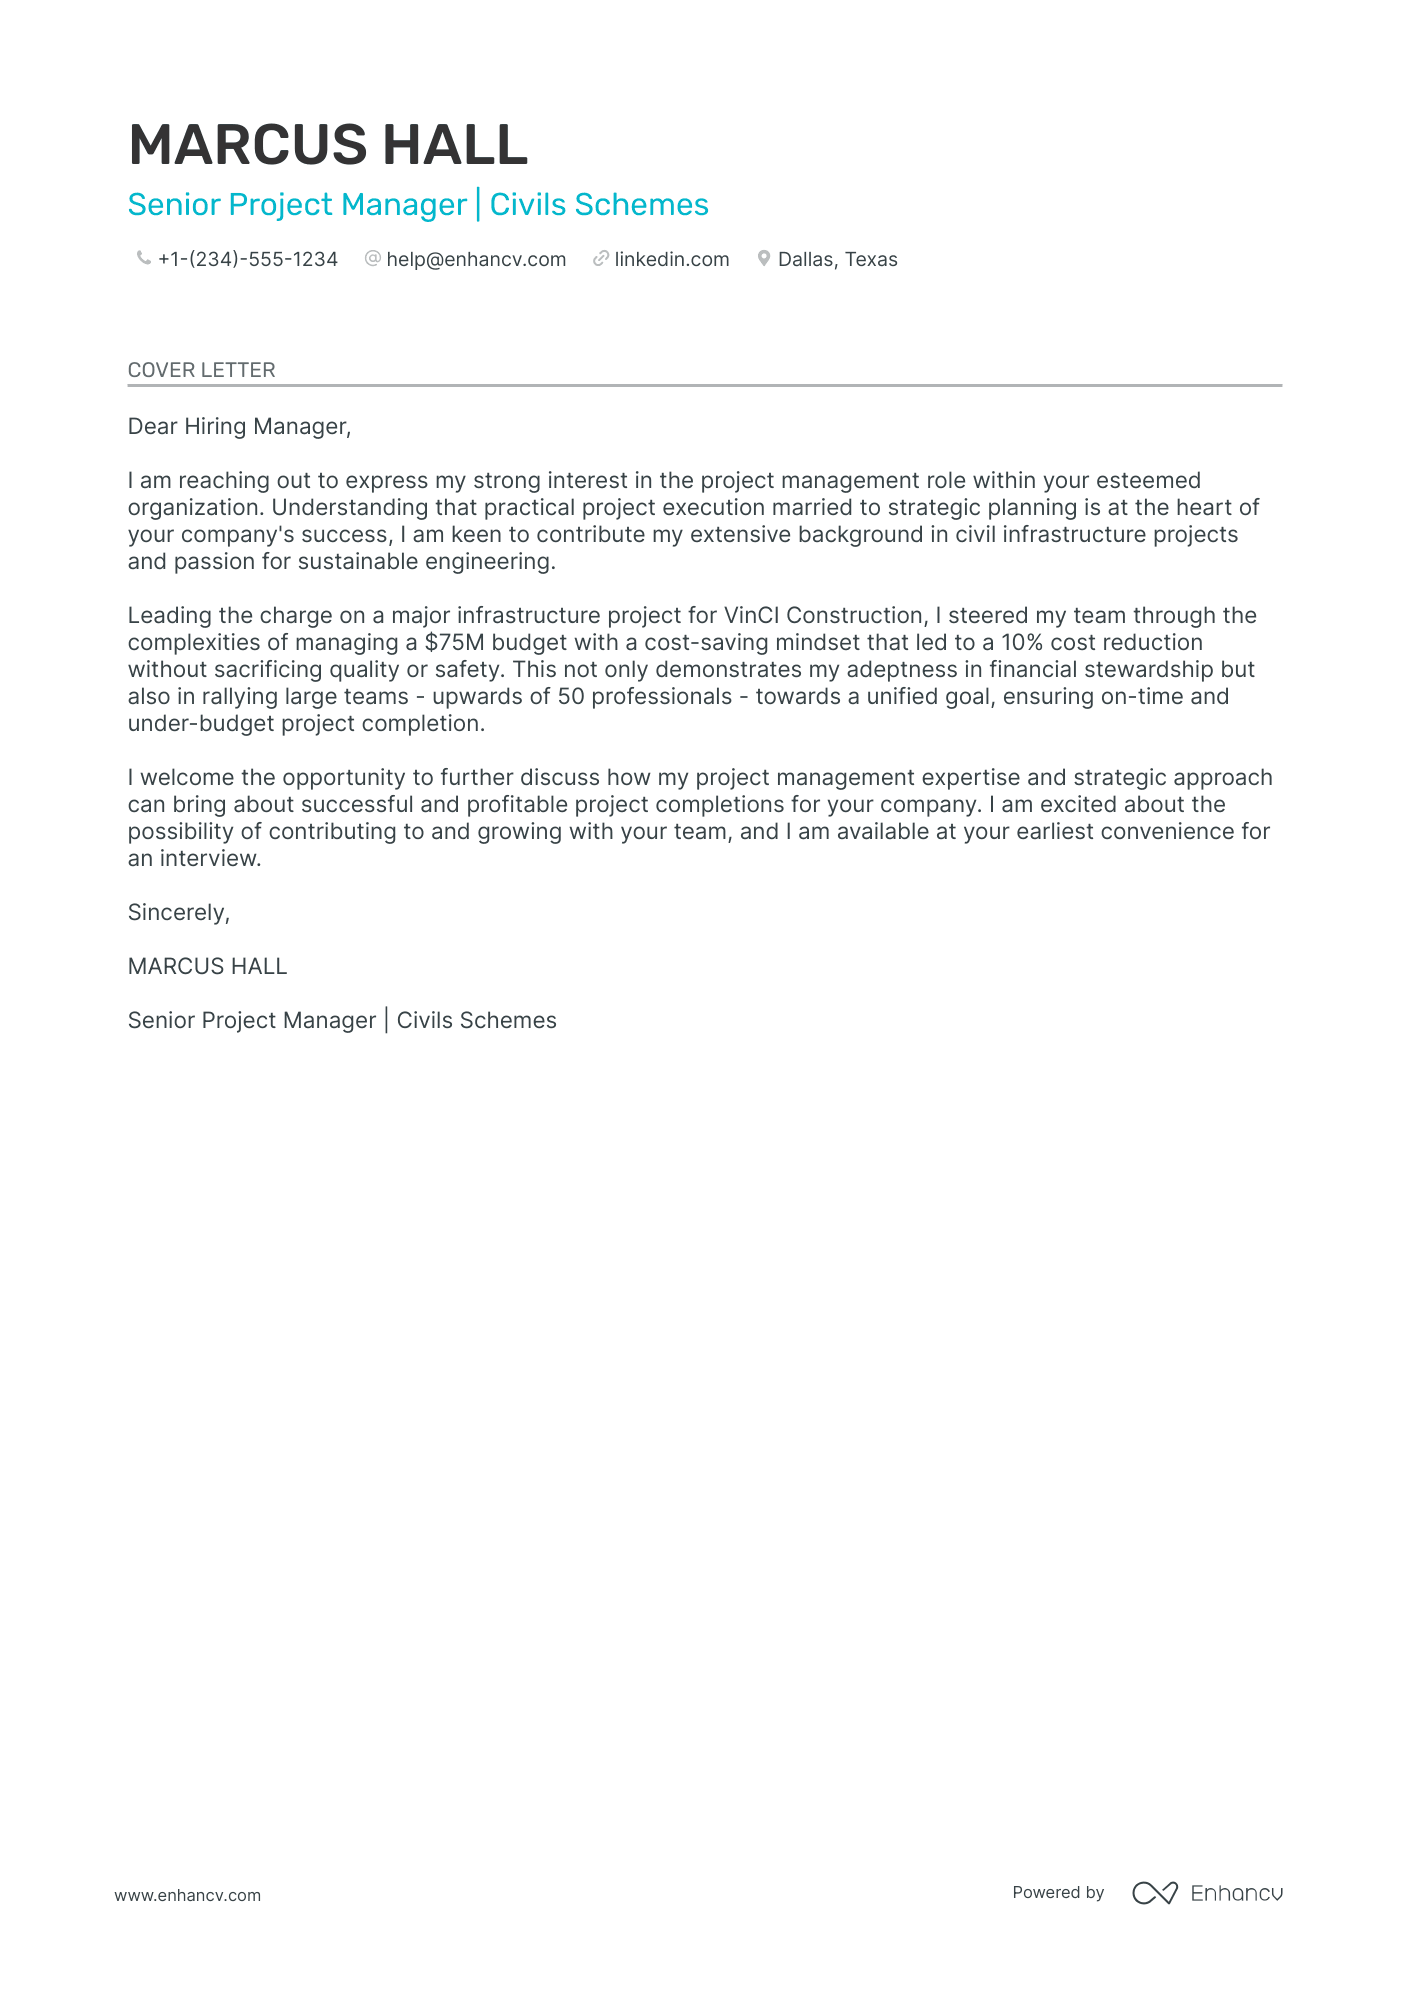 Senior Project Manager cover letter